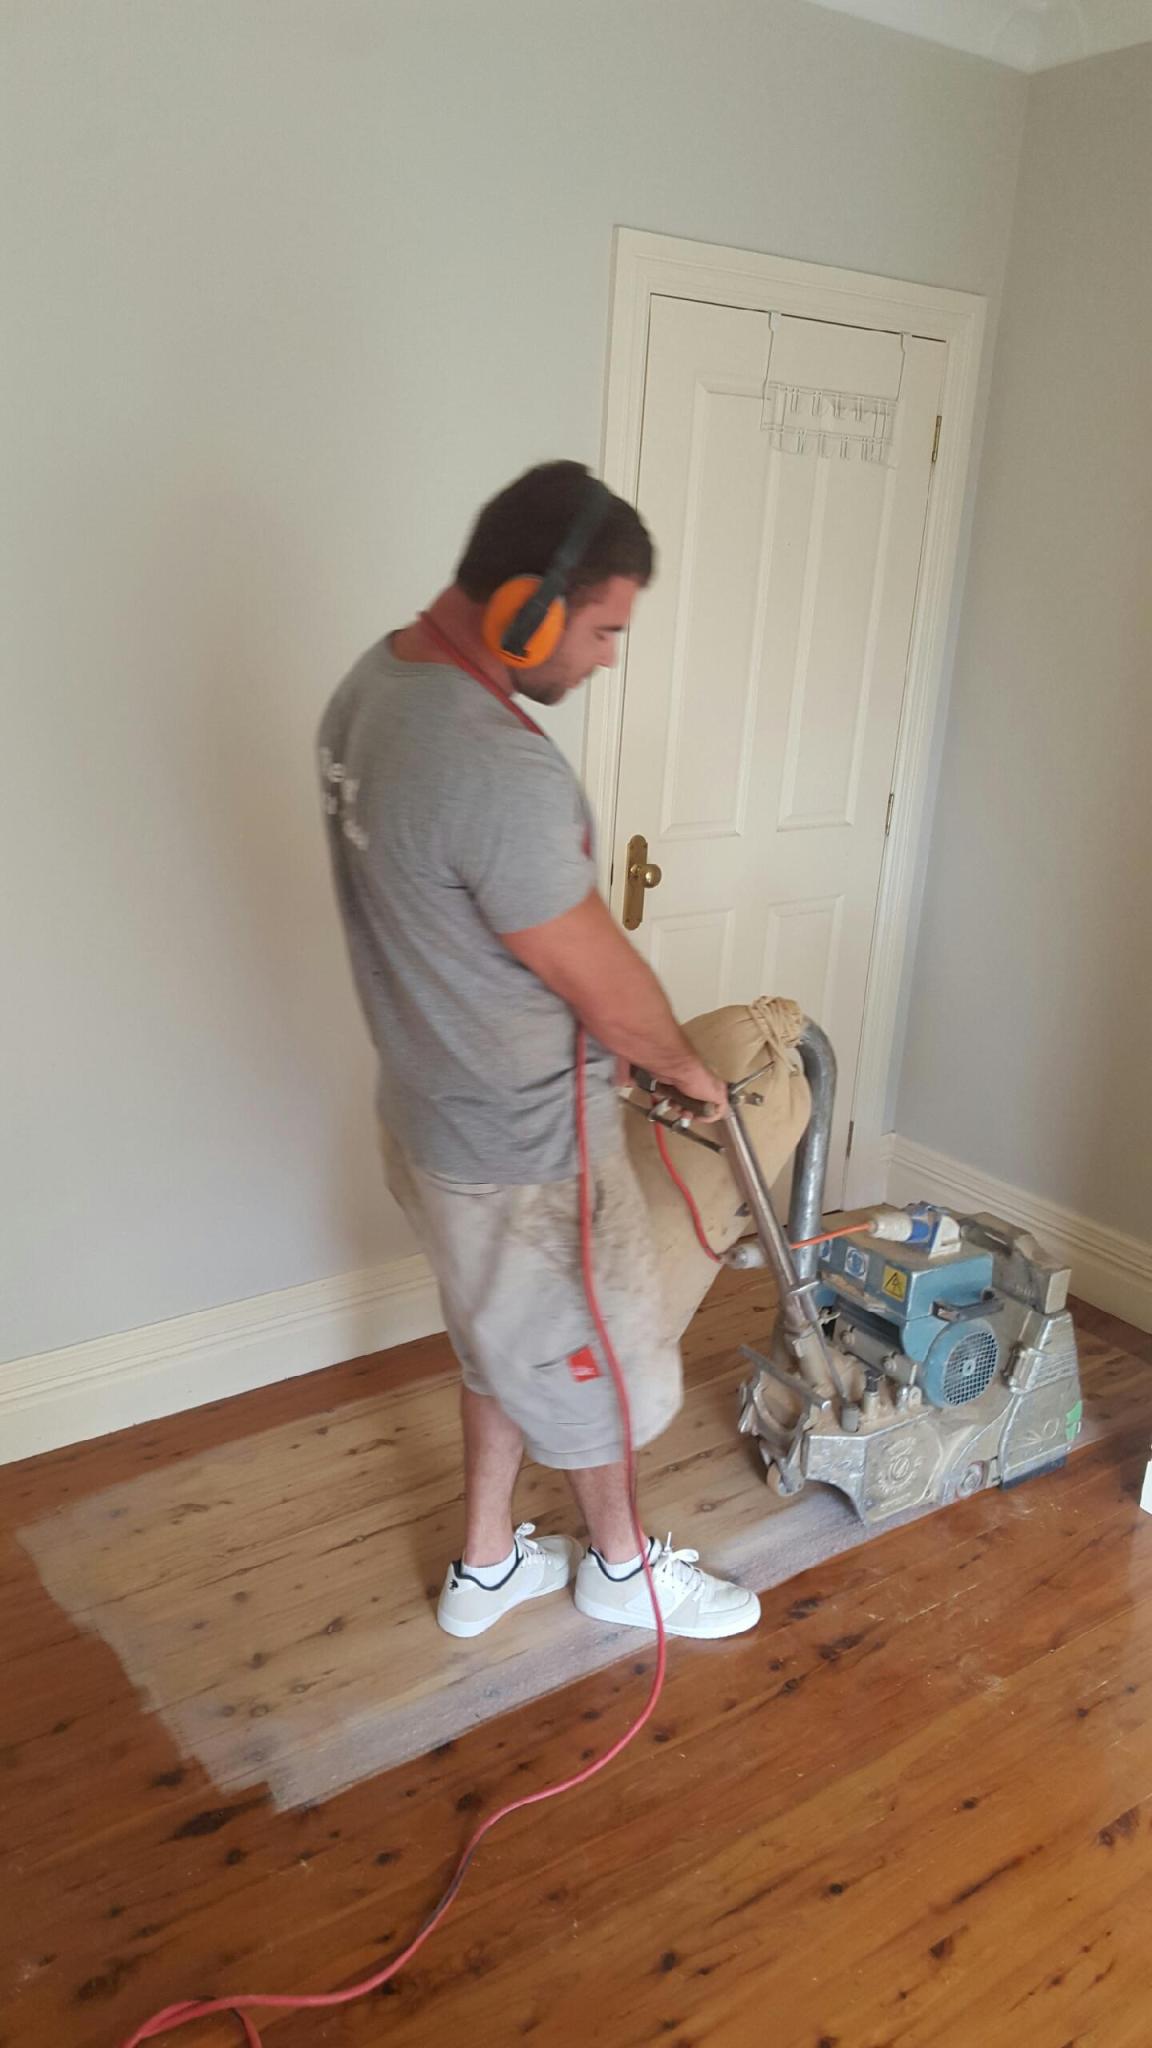 Cleaning up after hardwood flooring installation in Albury Wodonga